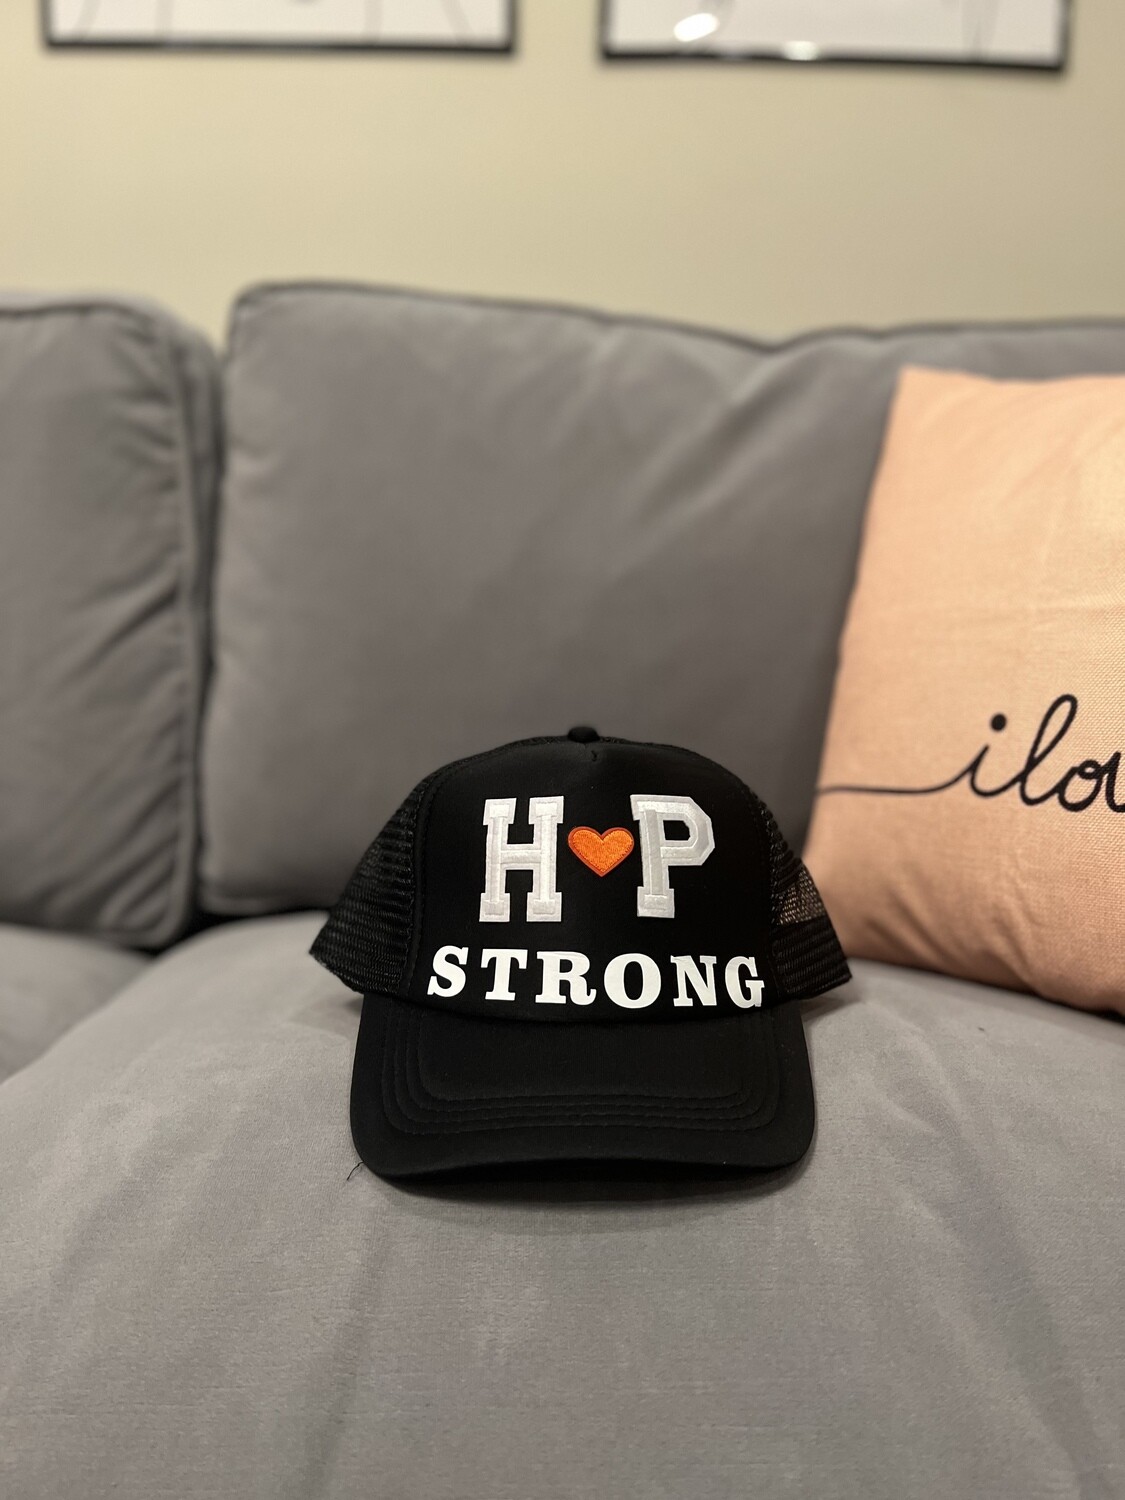 HP Strong Trucker Hat w/ white letters